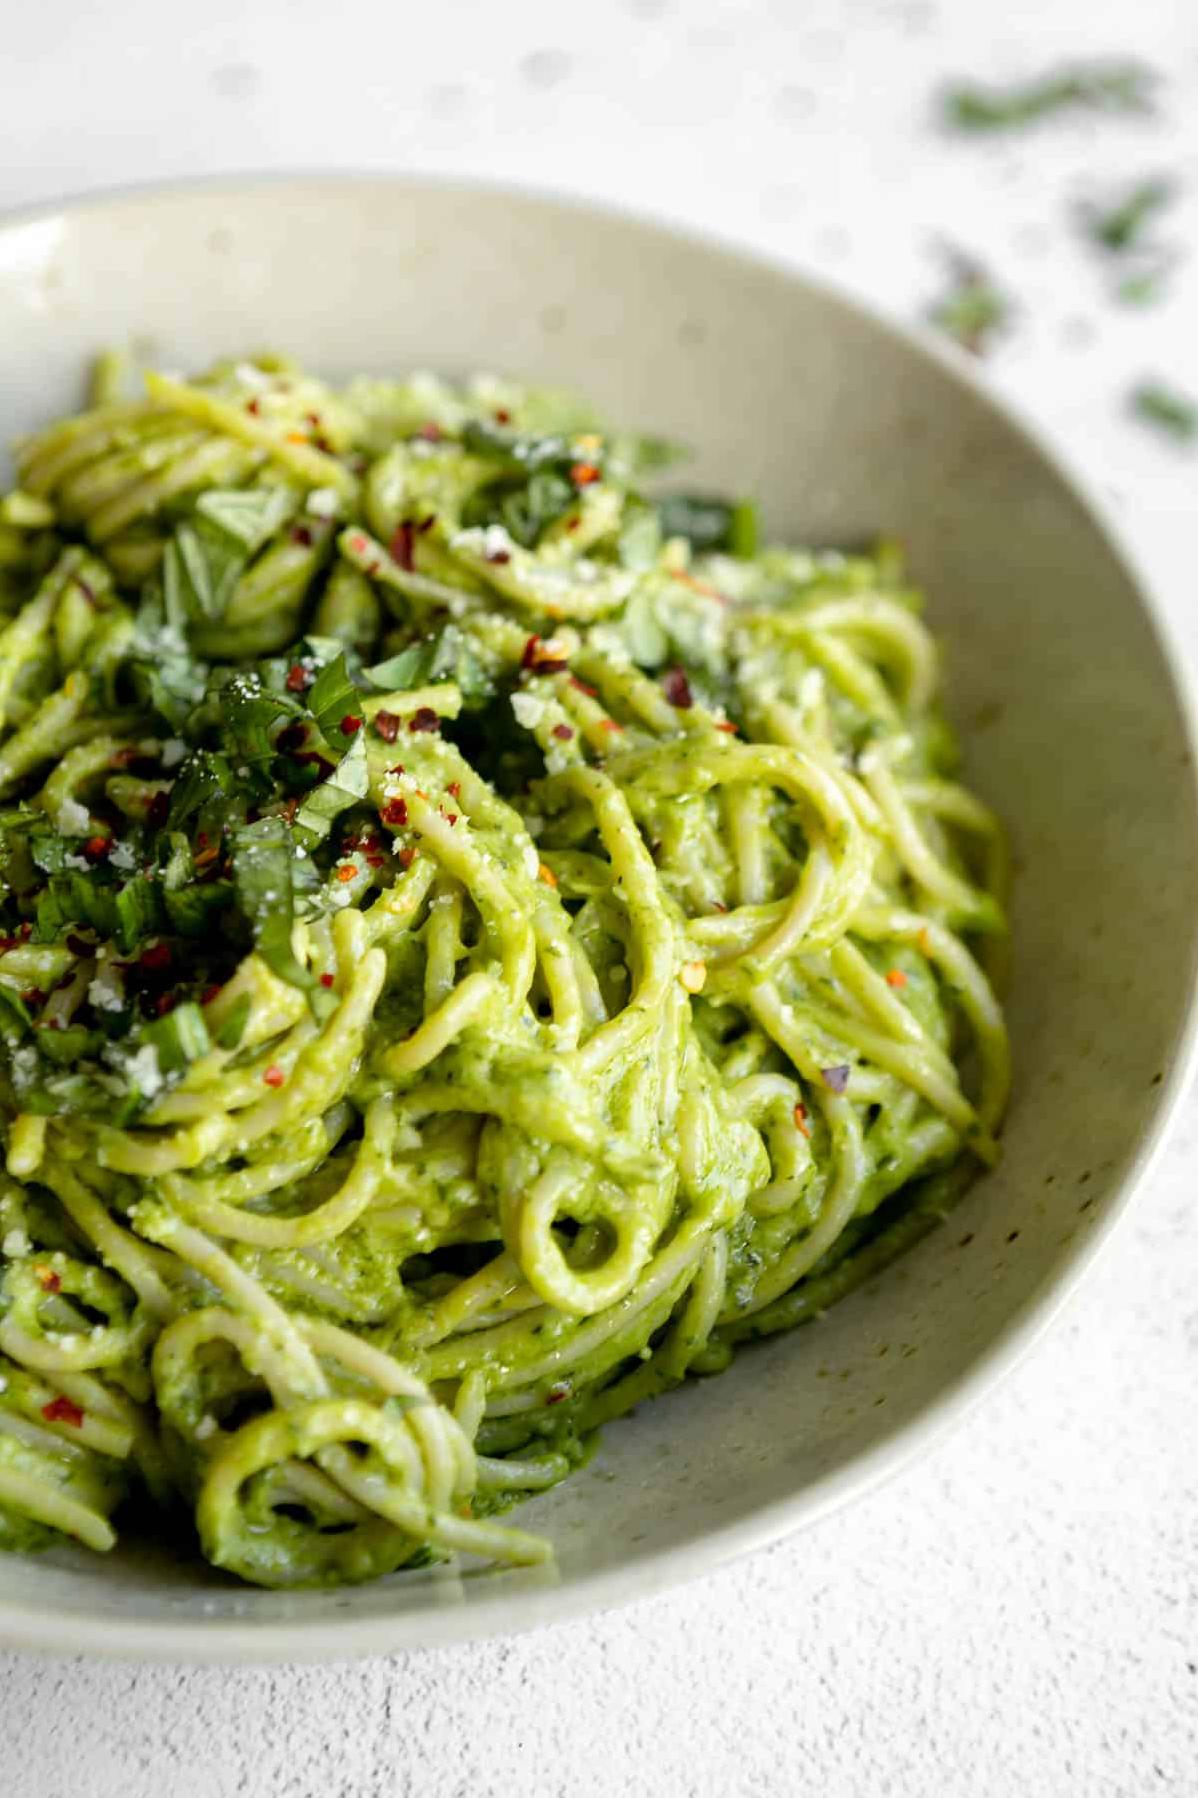  Your taste buds will be singing when you try this avocado pesto pasta.